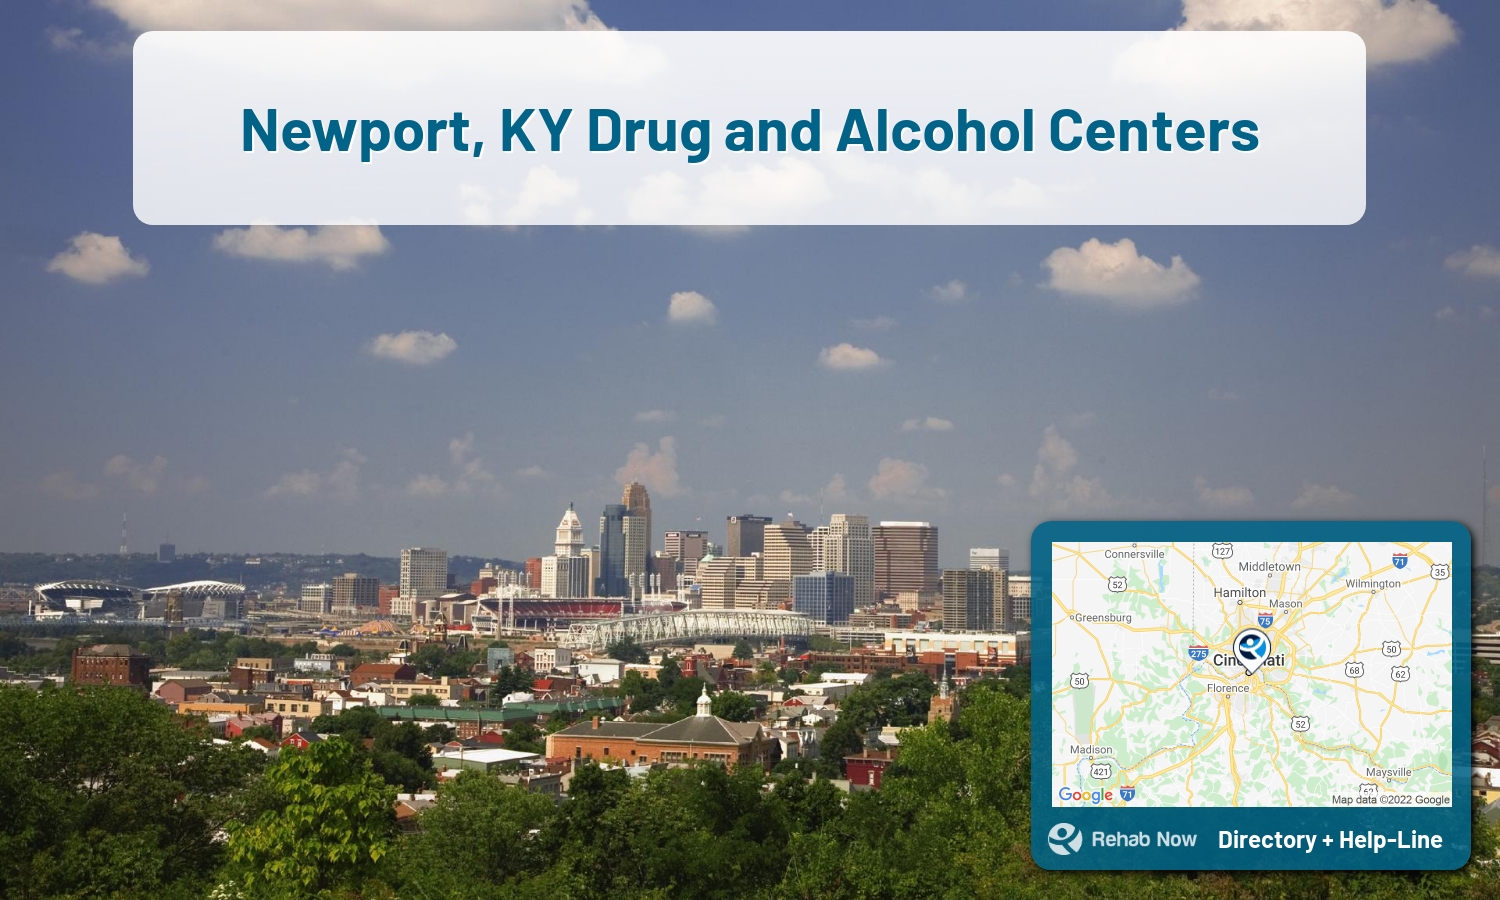 Newport, KY Treatment Centers. Find drug rehab in Newport, Kentucky, or detox and treatment programs. Get the right help now!